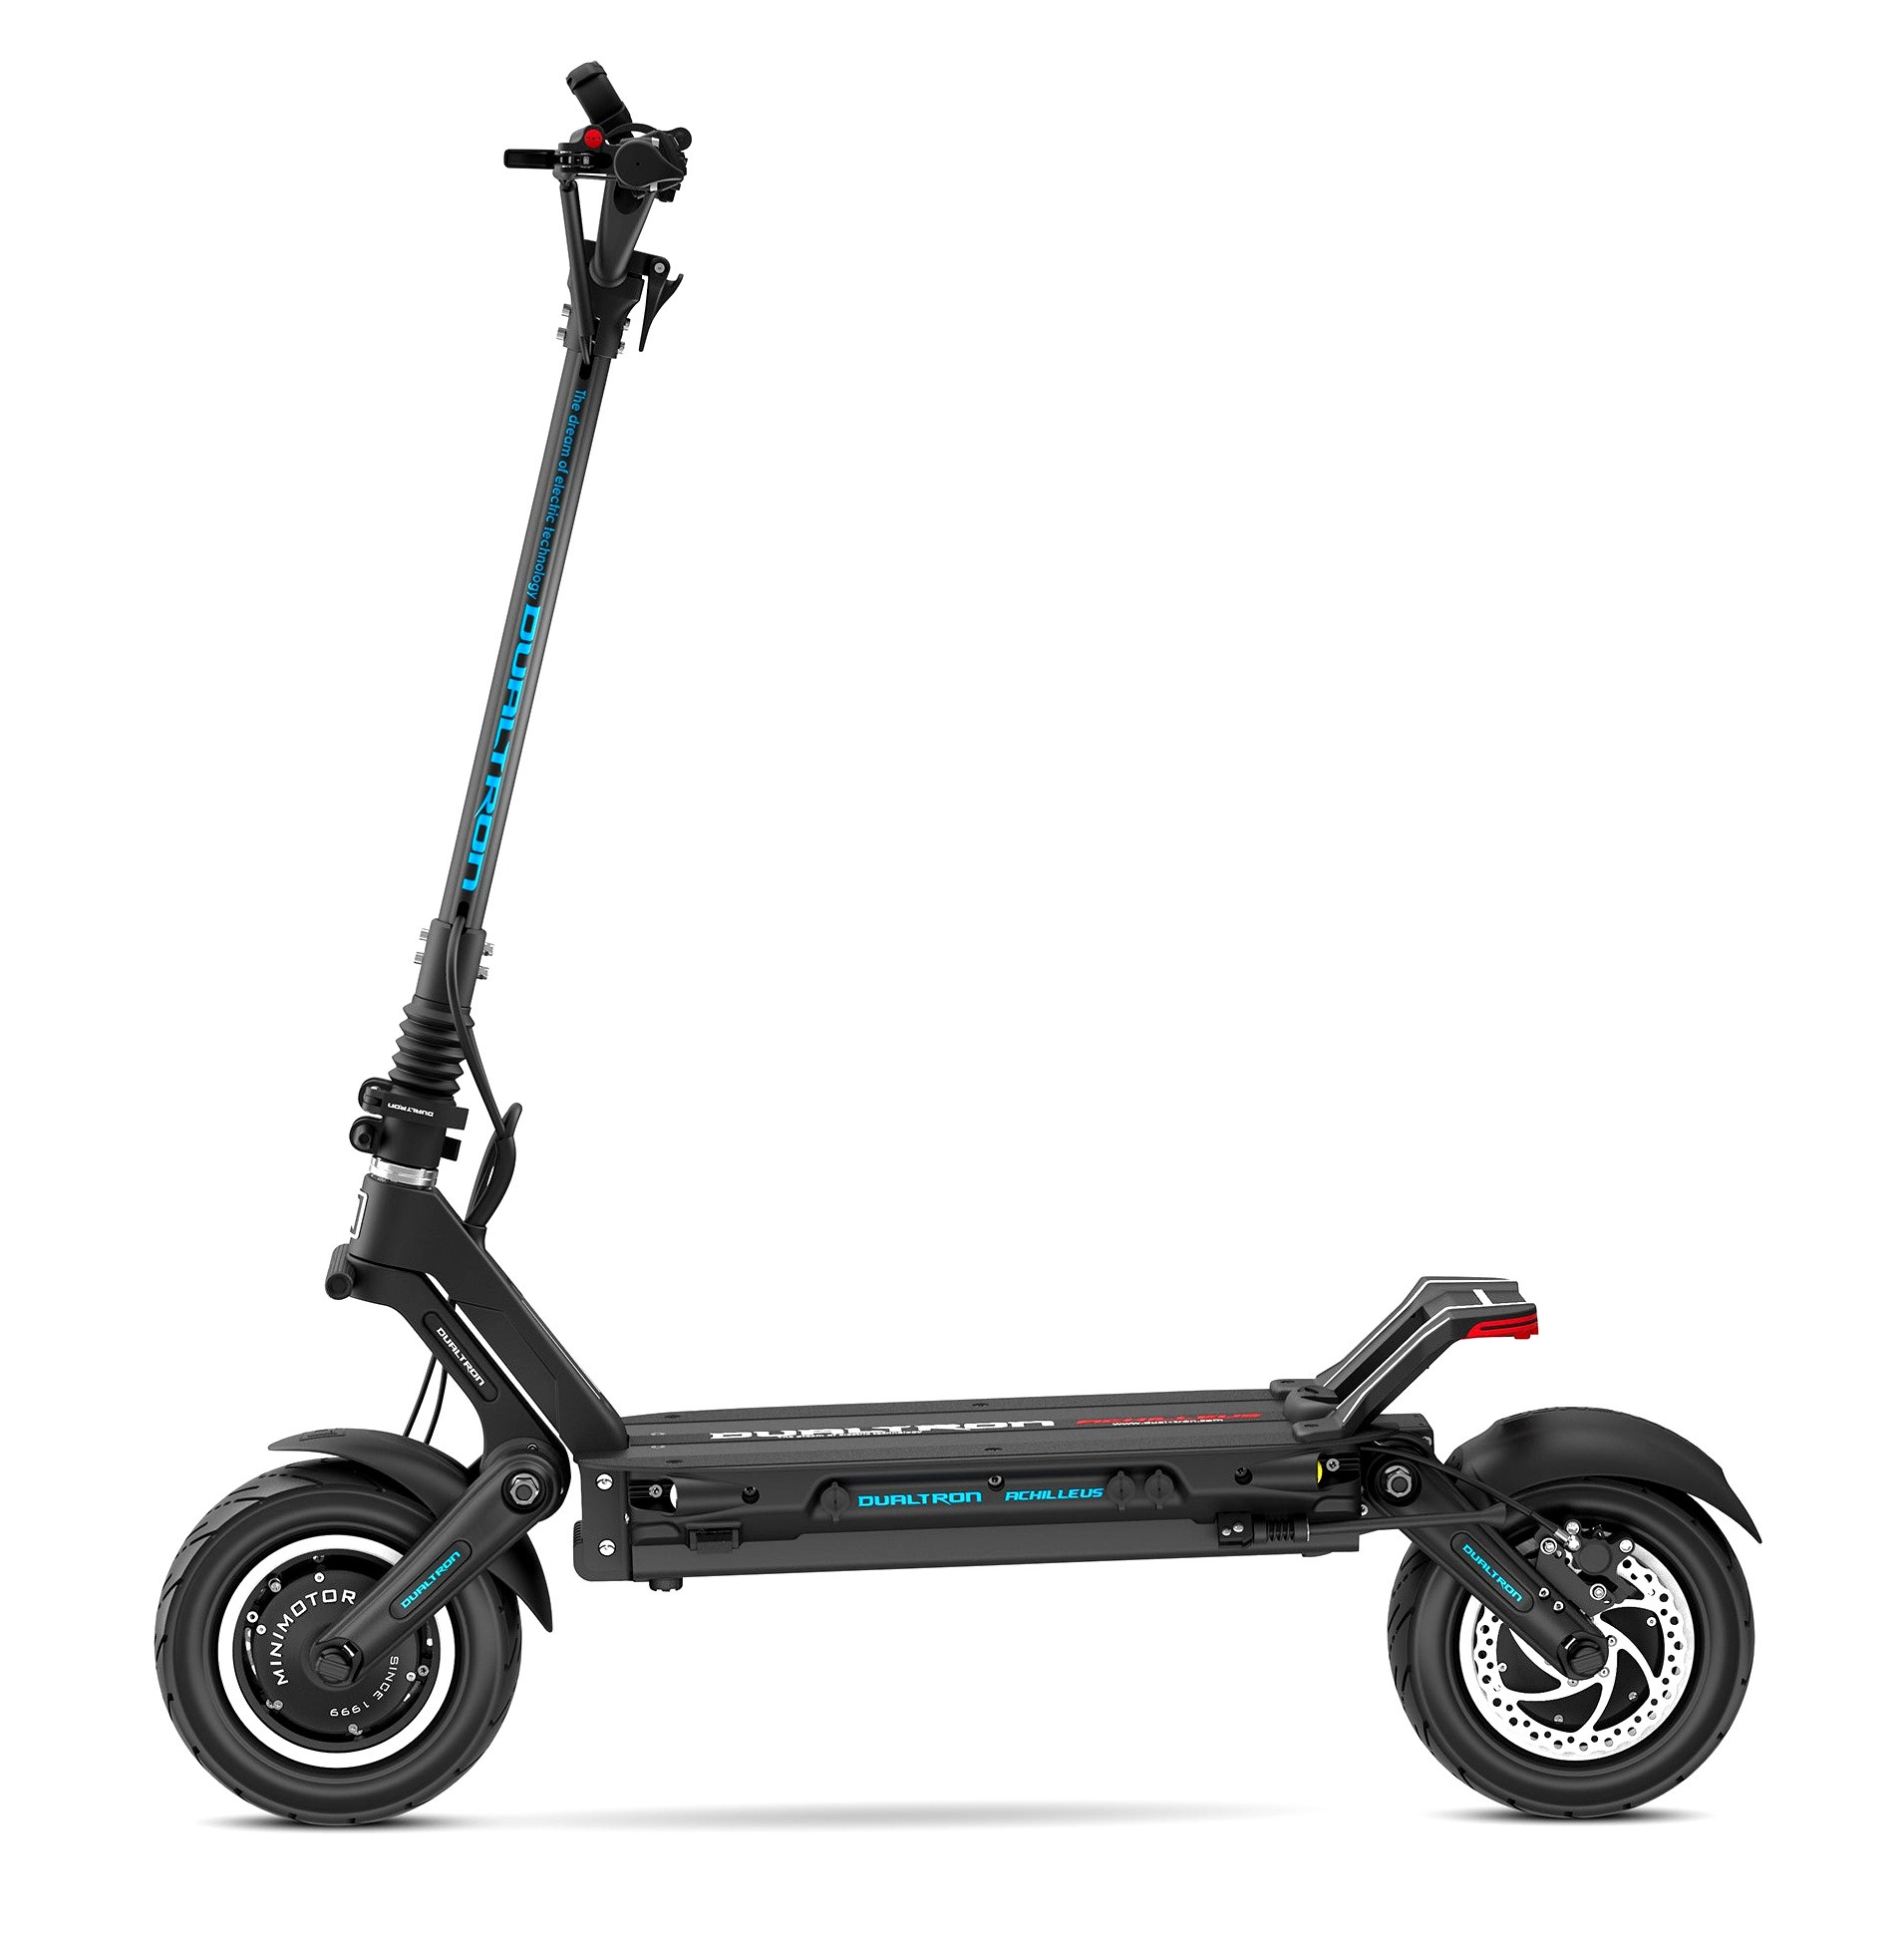 Dualtron Achilleus electric scooter in stock. Enjoy the ride